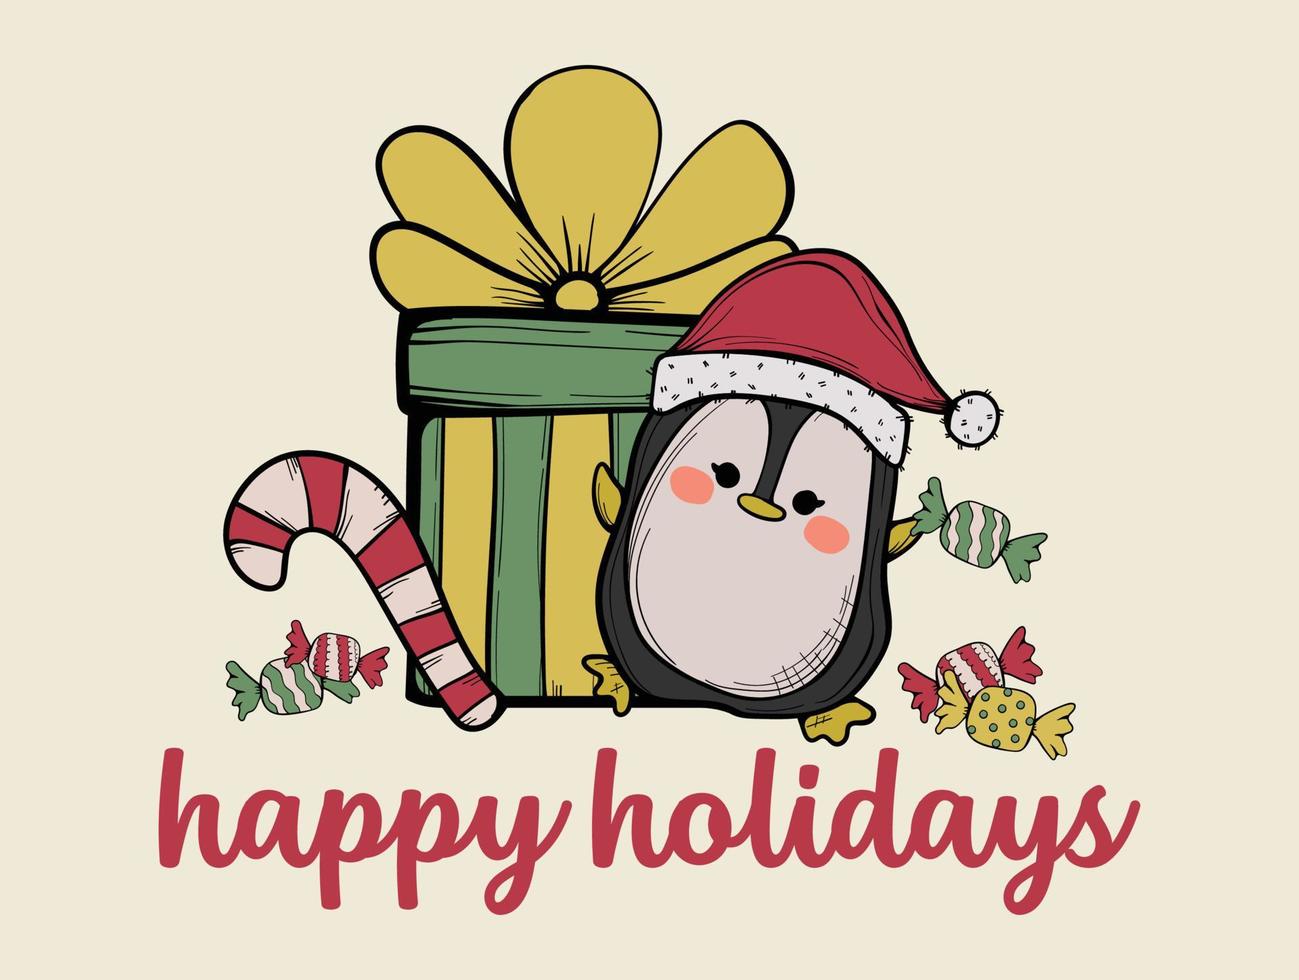 Happy Holidays Text with a Penguin Greeting Card Composition Template for Celebration Illustration vector